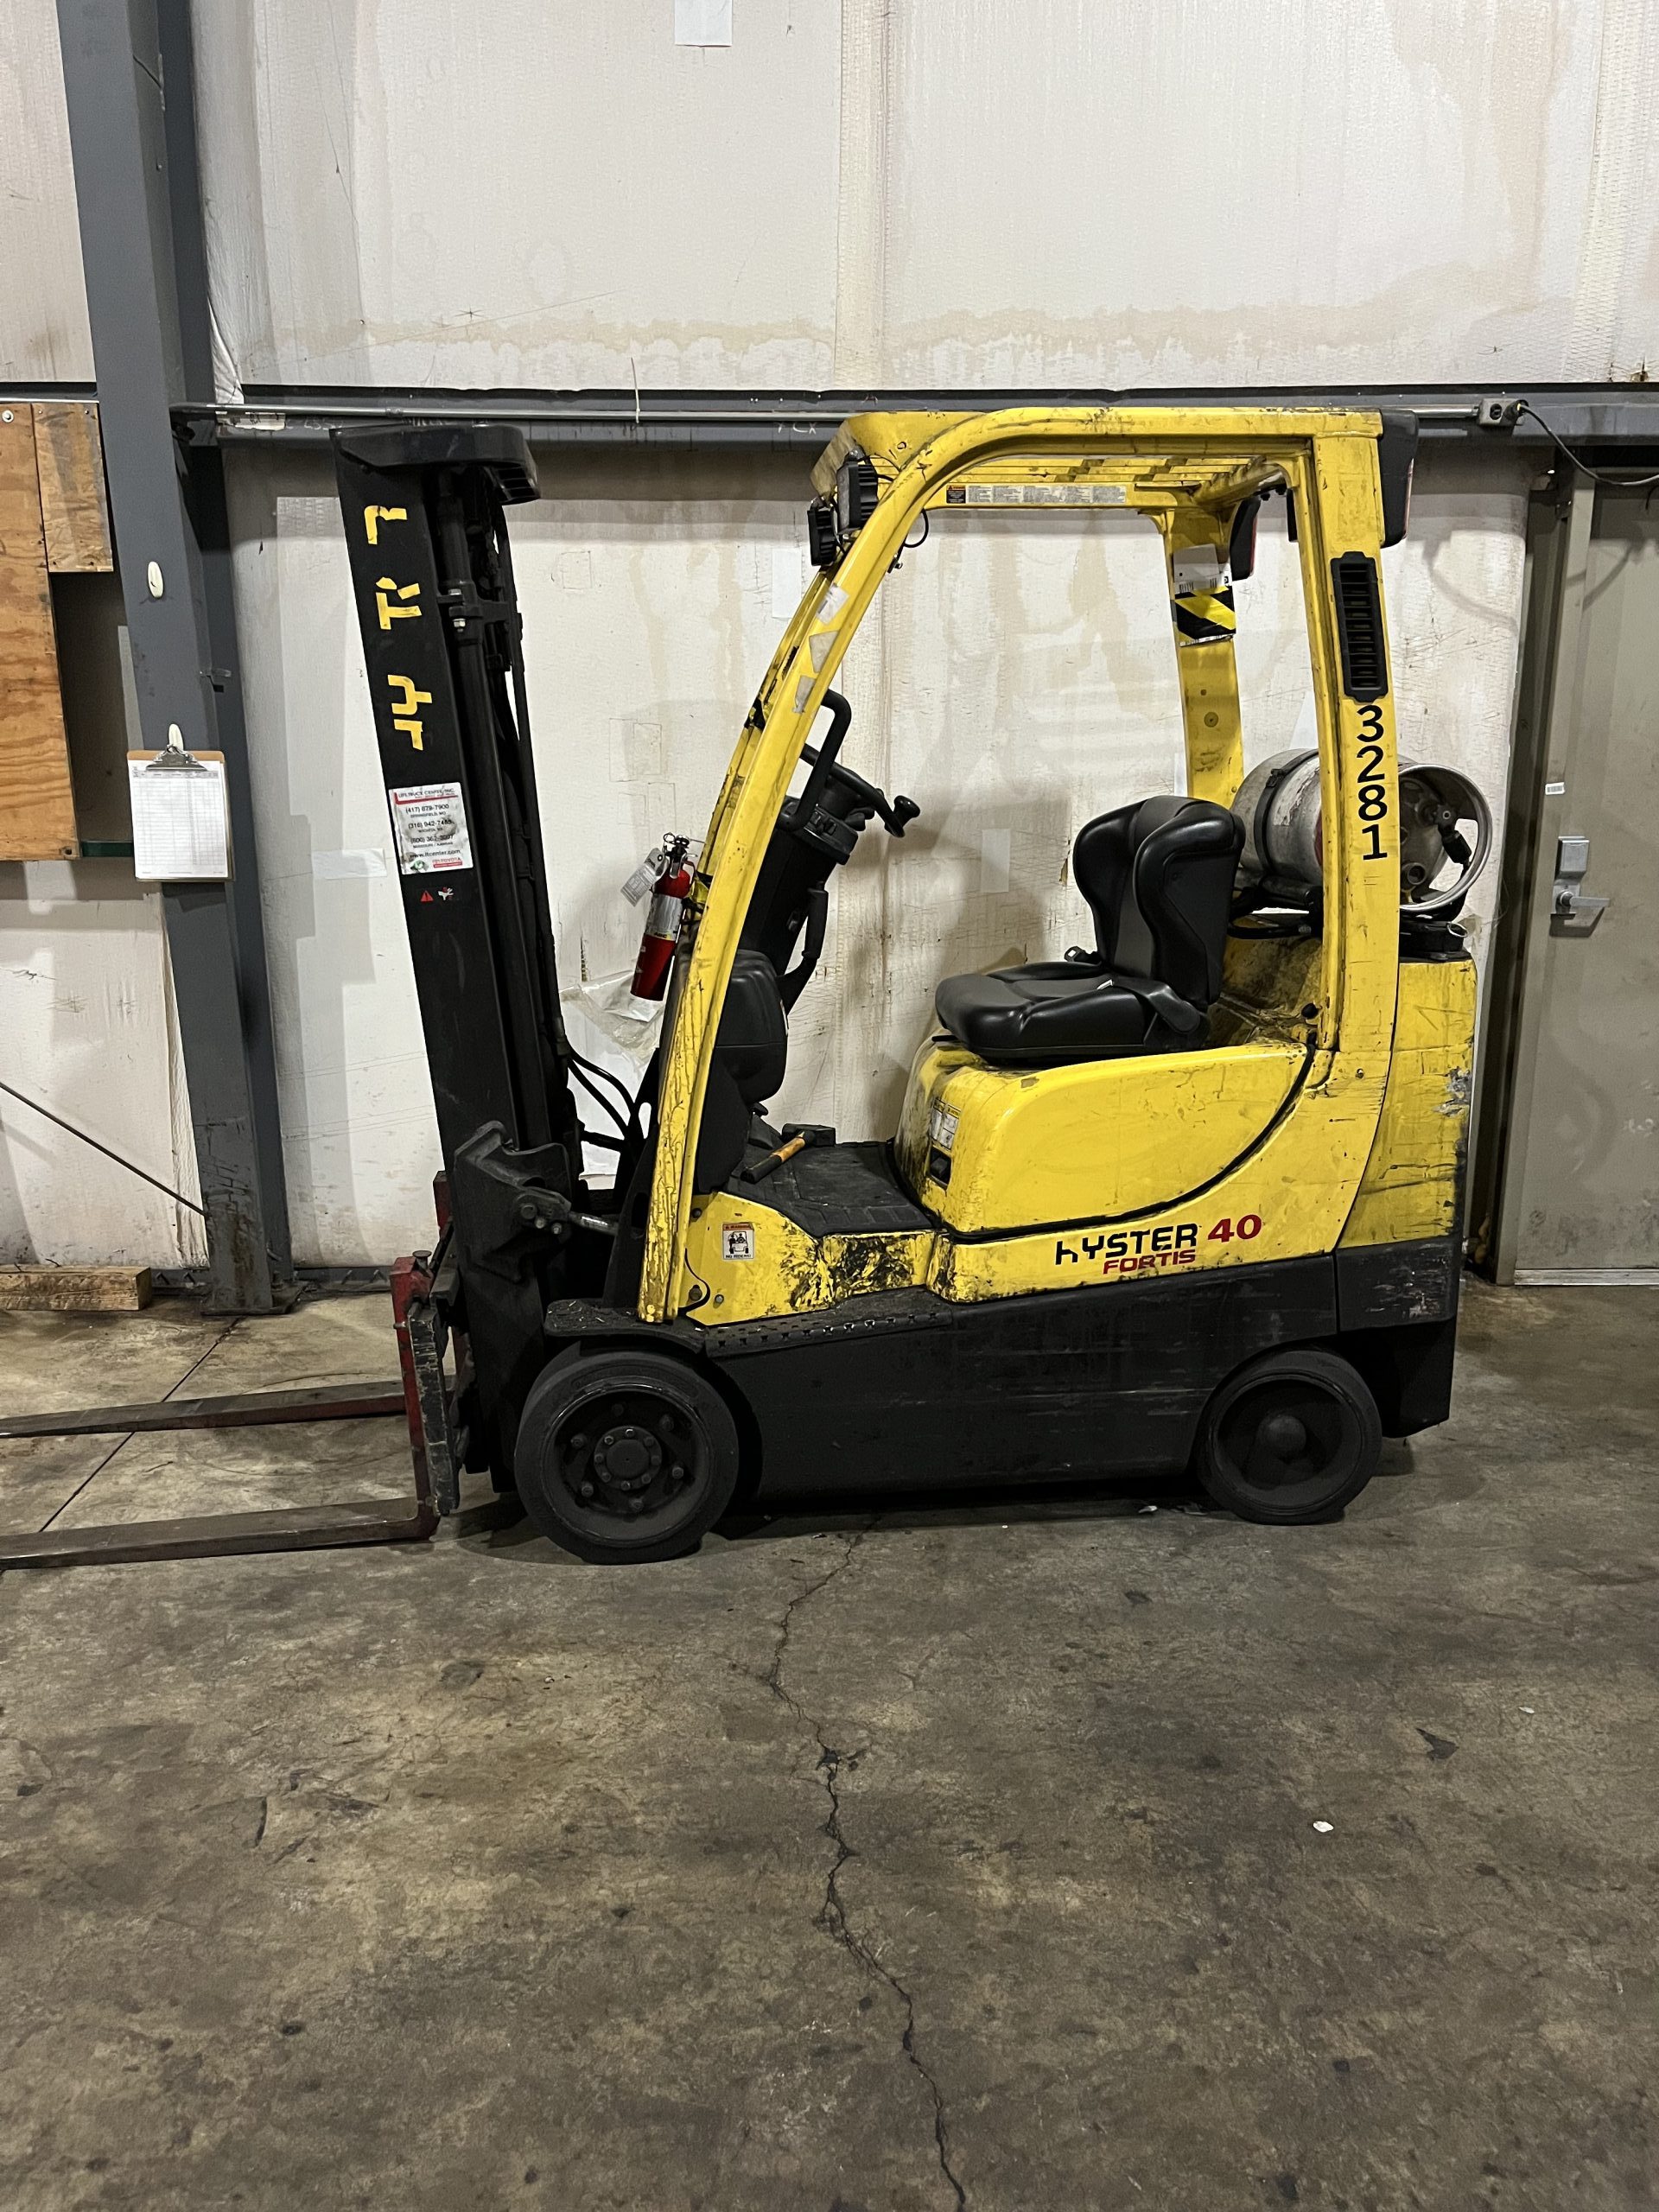 Featured image for “HYSTER 4,000 LBS. CAPACITY CUSHION TIRED FORKLIFT”